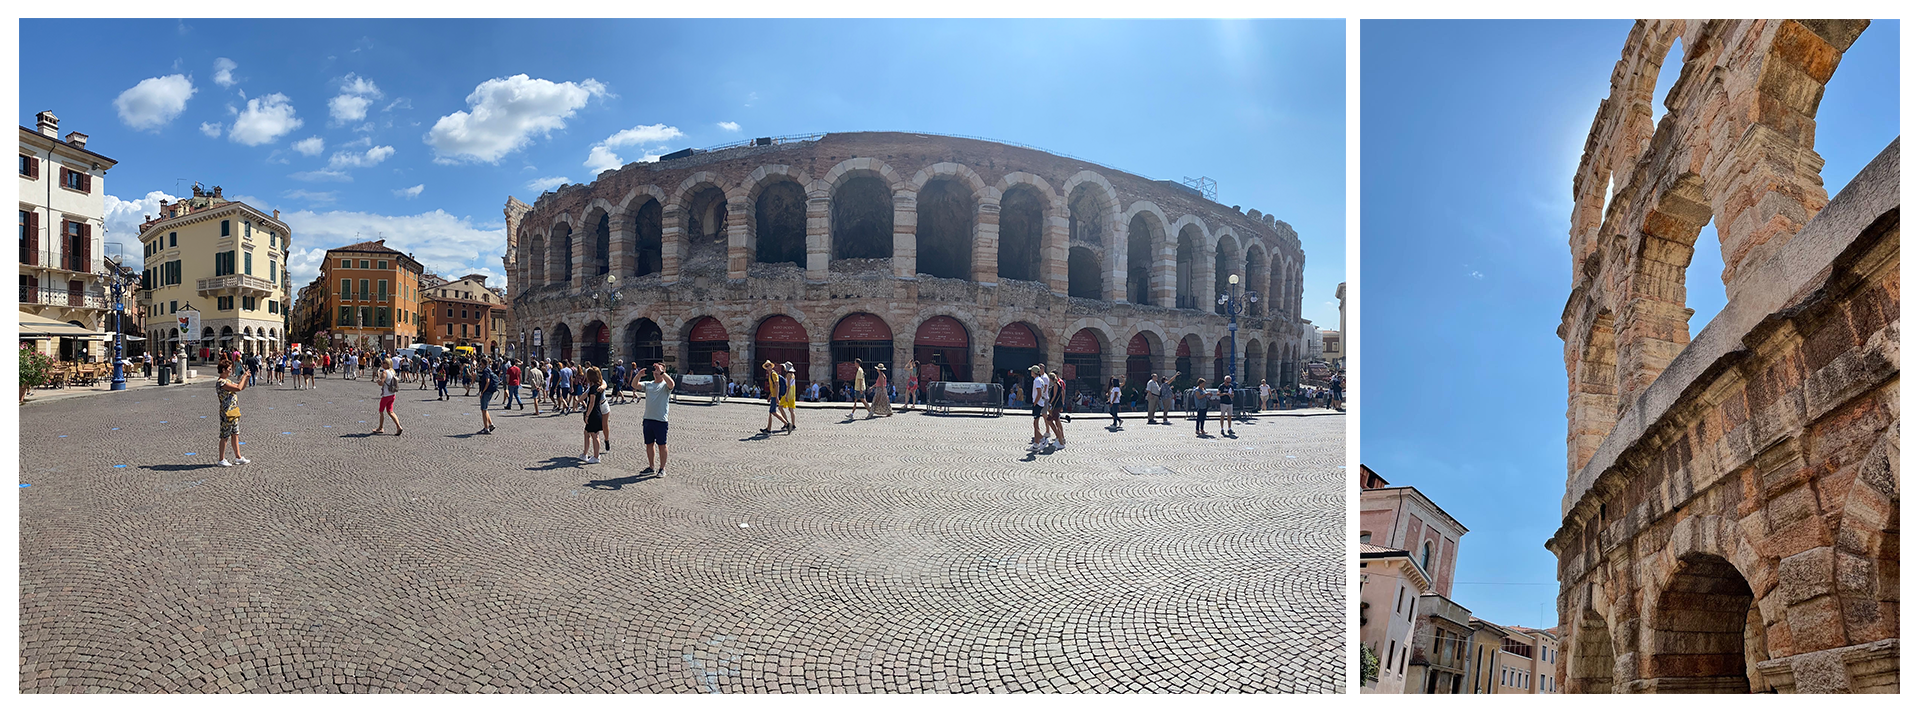 Arena-di-Verona-this-is-a-very-well-preserved-amphitheater.png